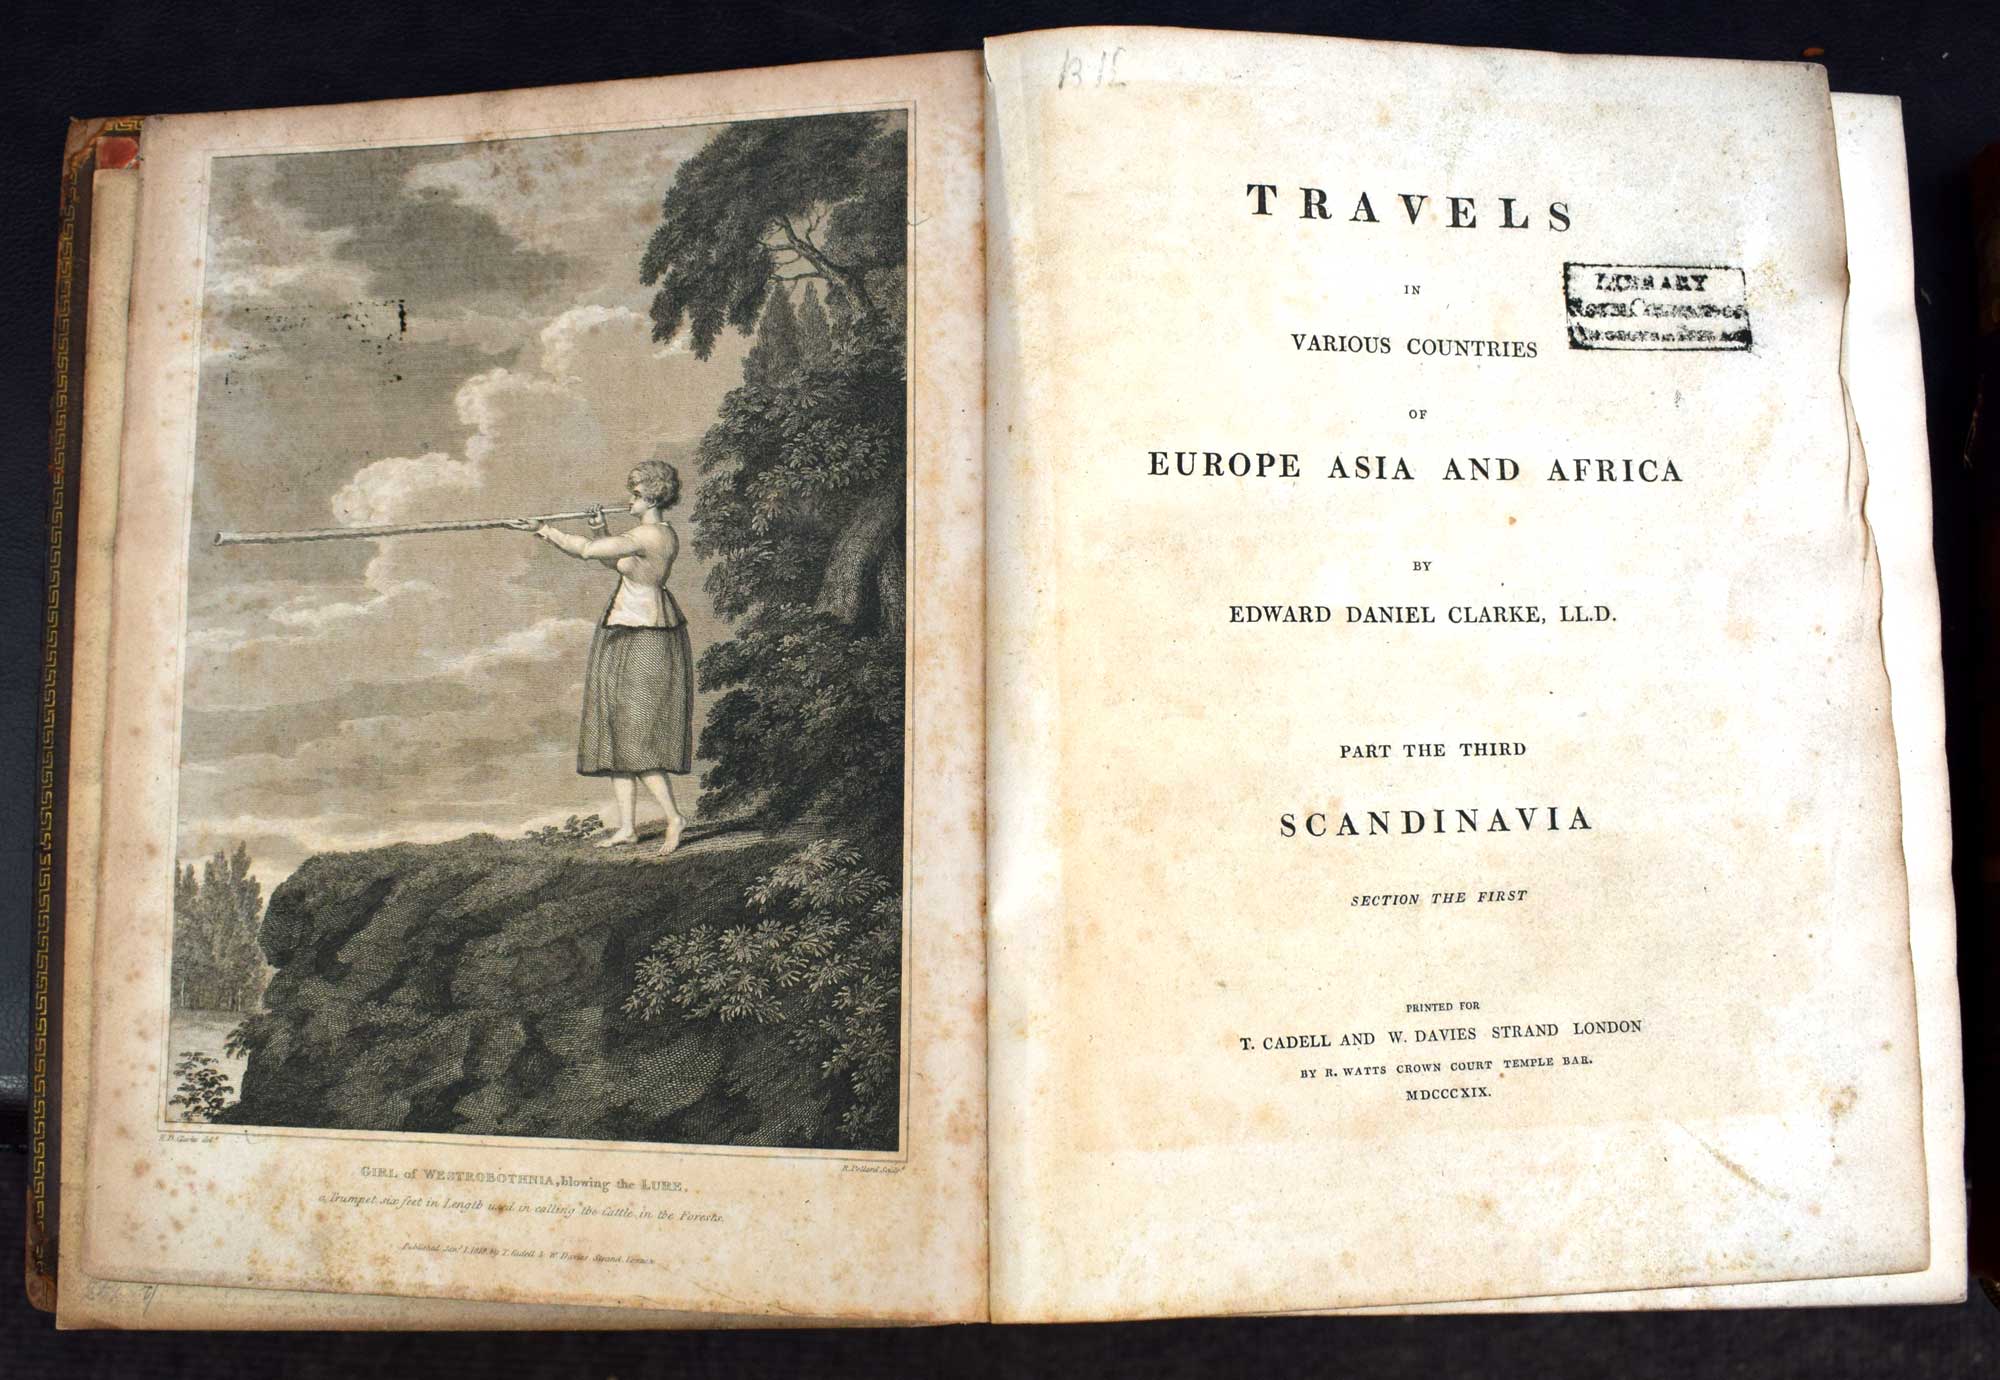 Travels in Various Countries of Europe, Asia and Africa. Part the Third. Scandinavia. Two volumes.